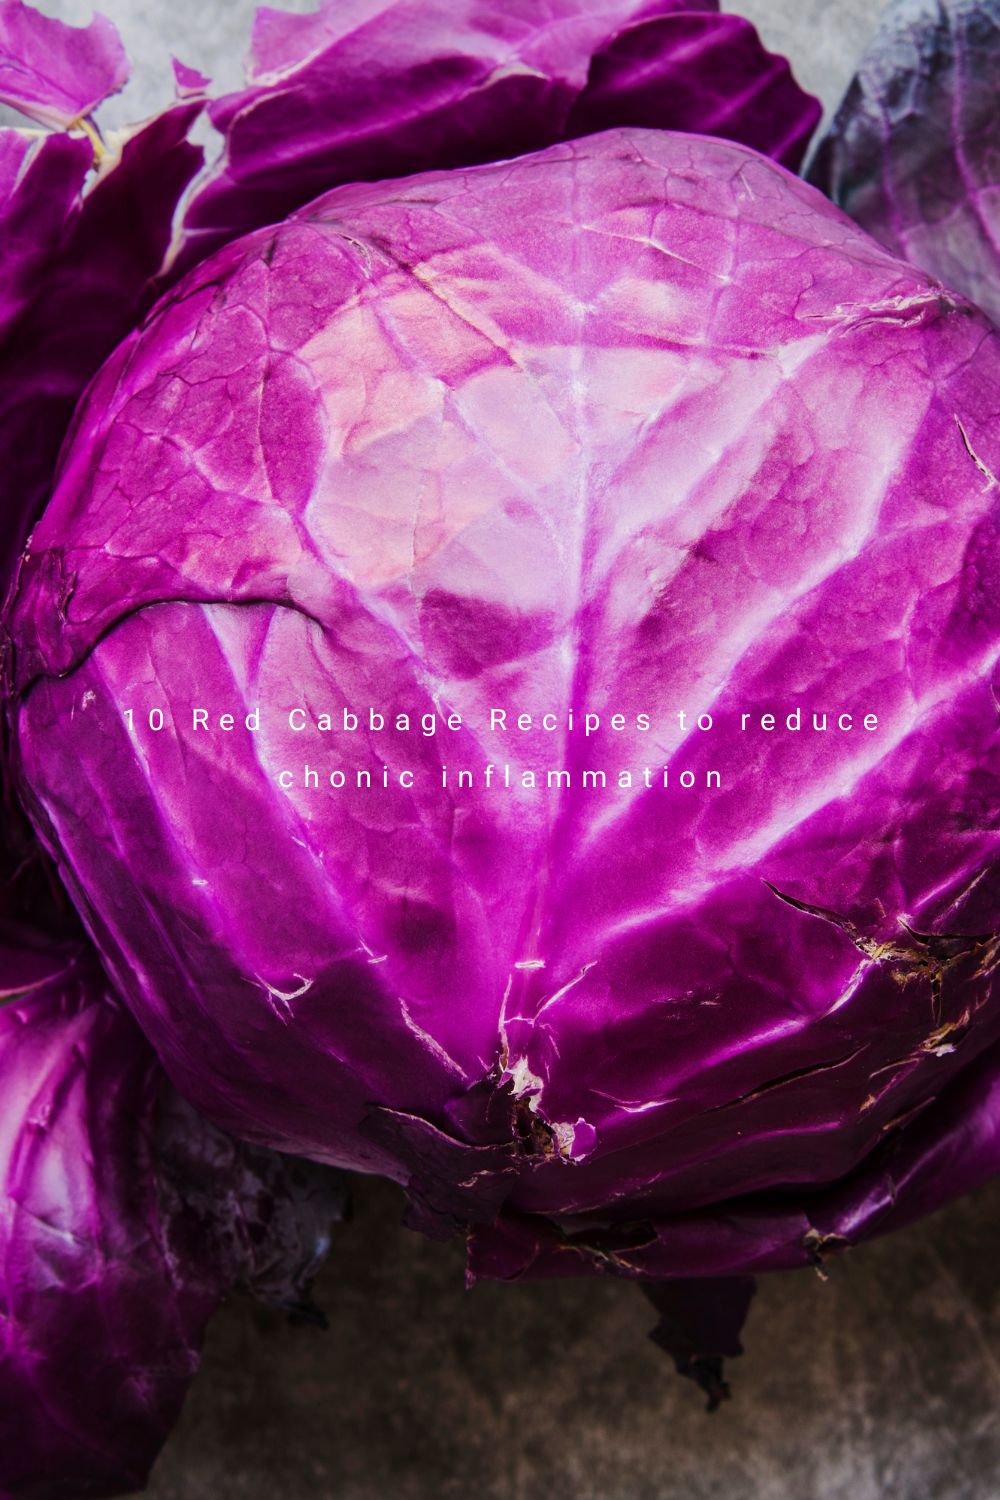 raw red cabbage head with text displaying the wrods 10 red cabbage recipes to reduce chronic inflammation